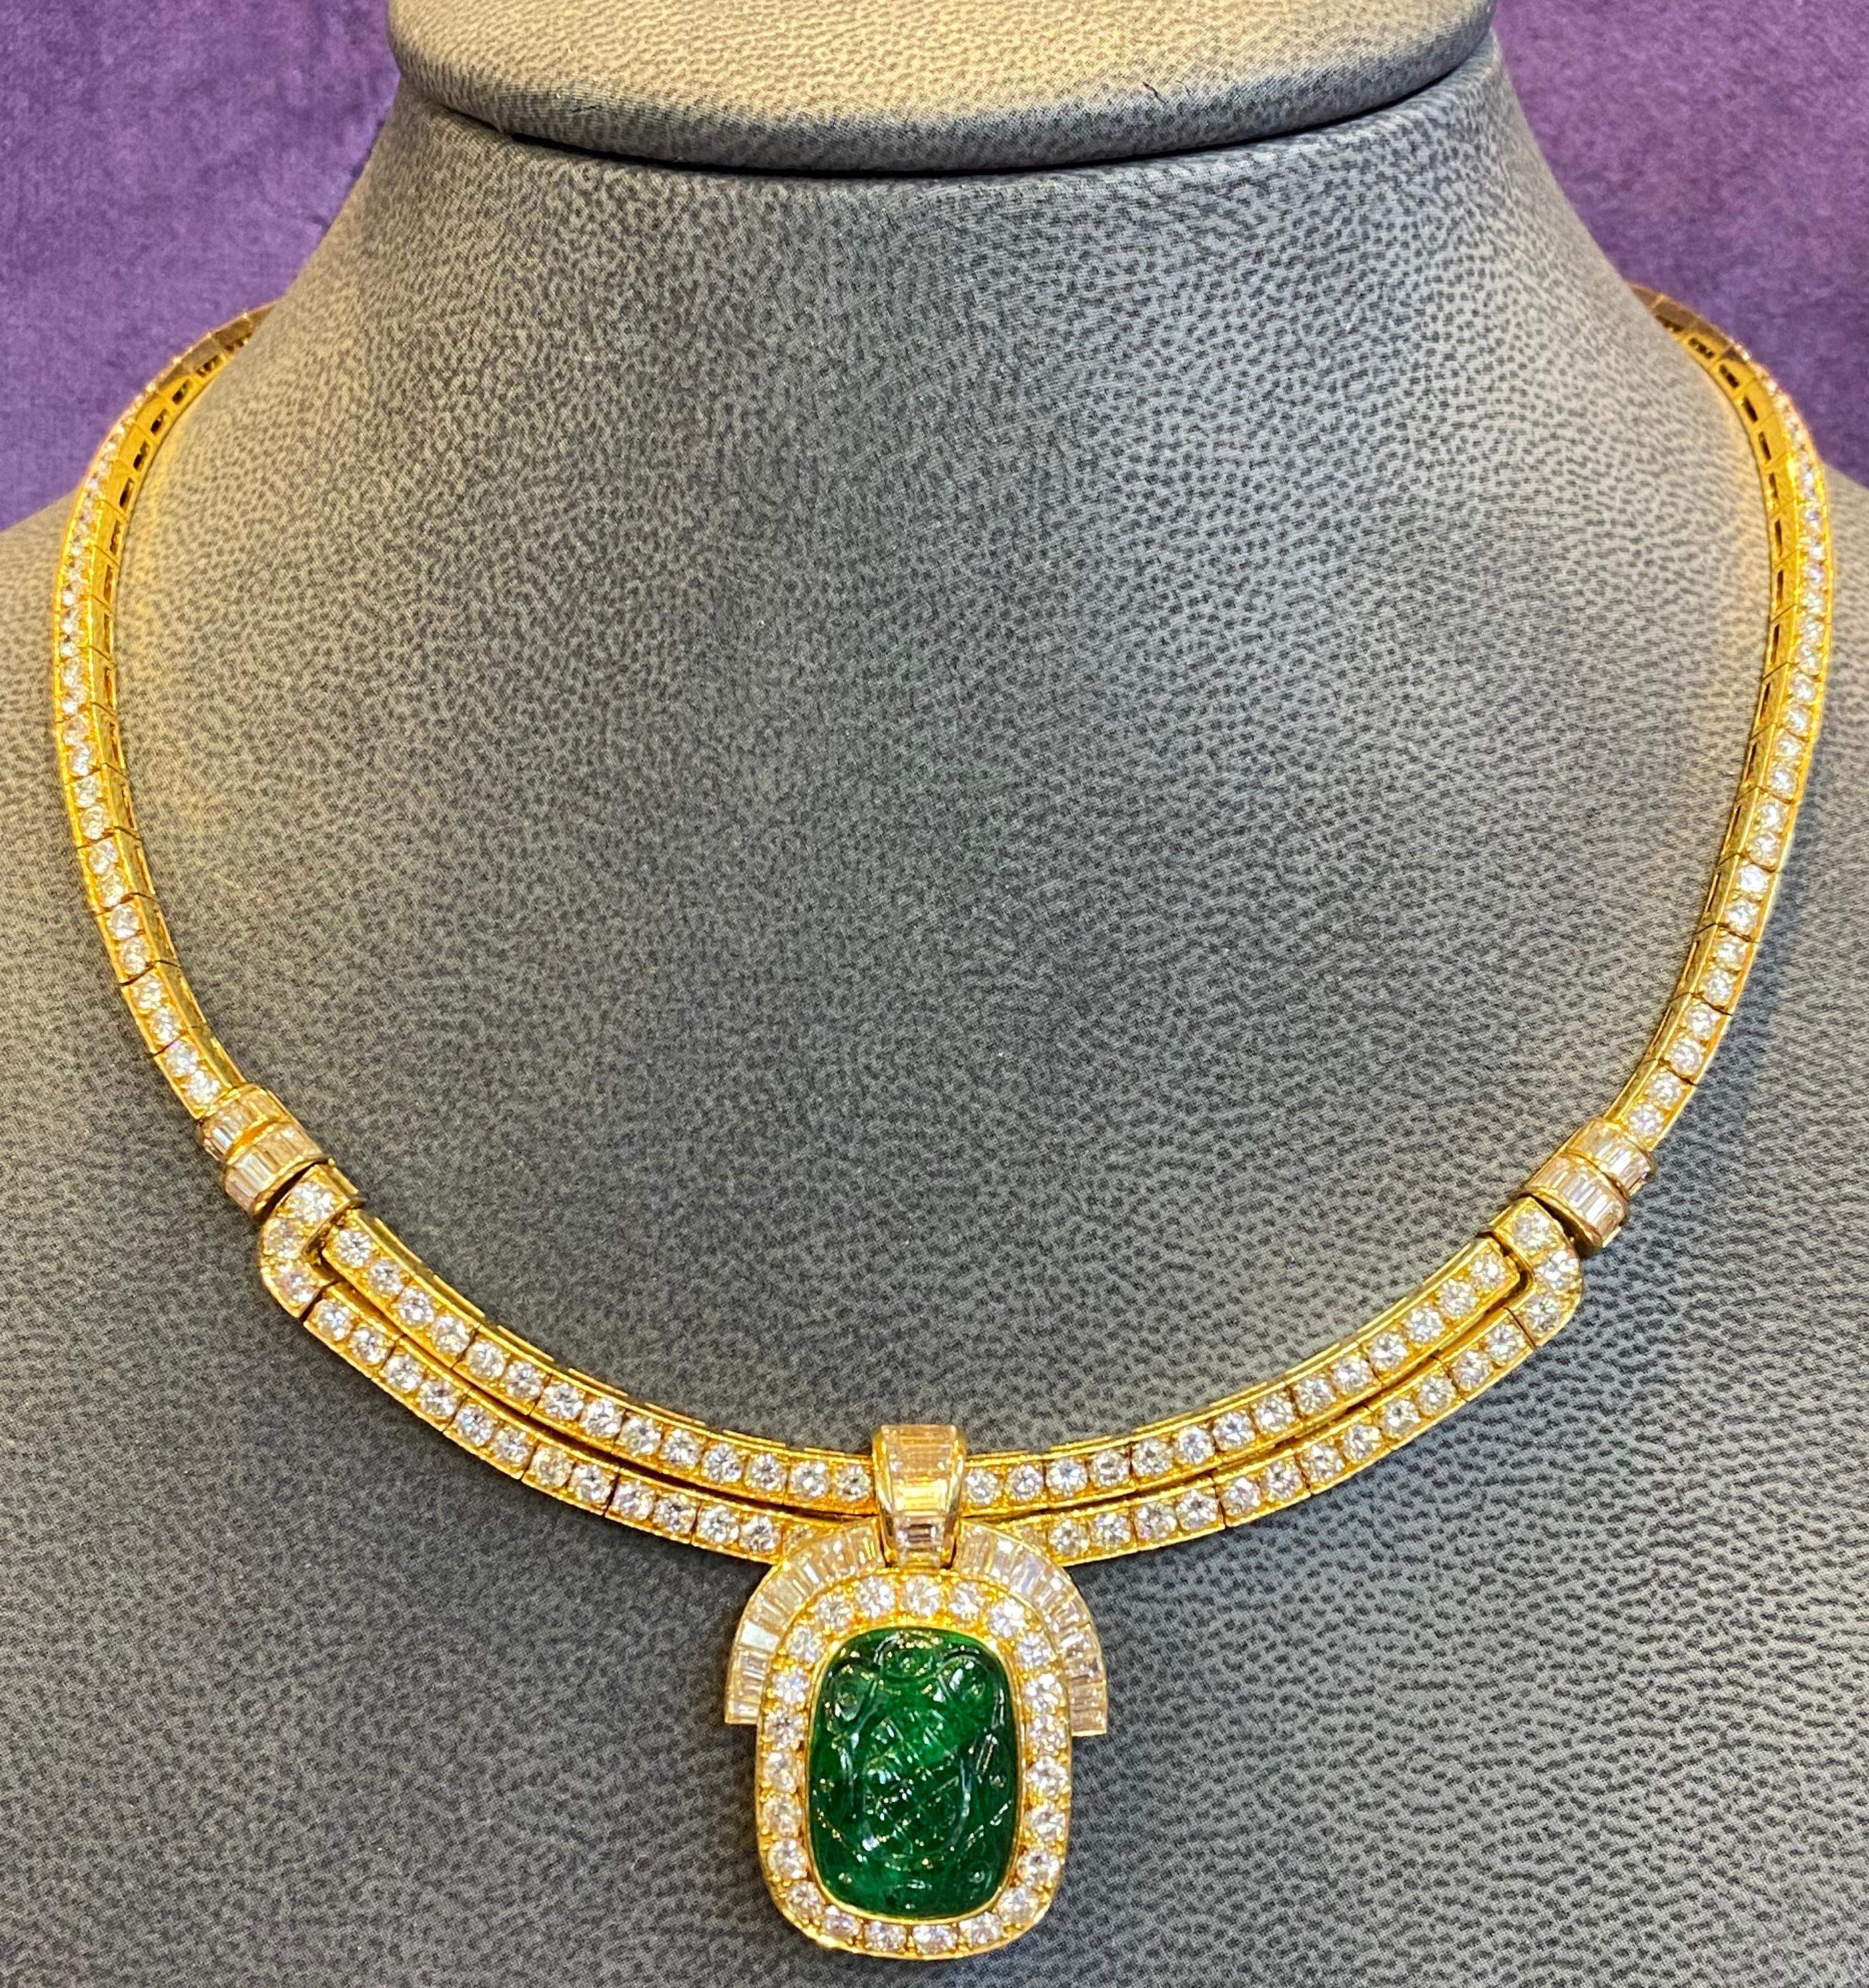 Round Cut Van Cleef & Arpels Carved Emerald and Diamond Necklace